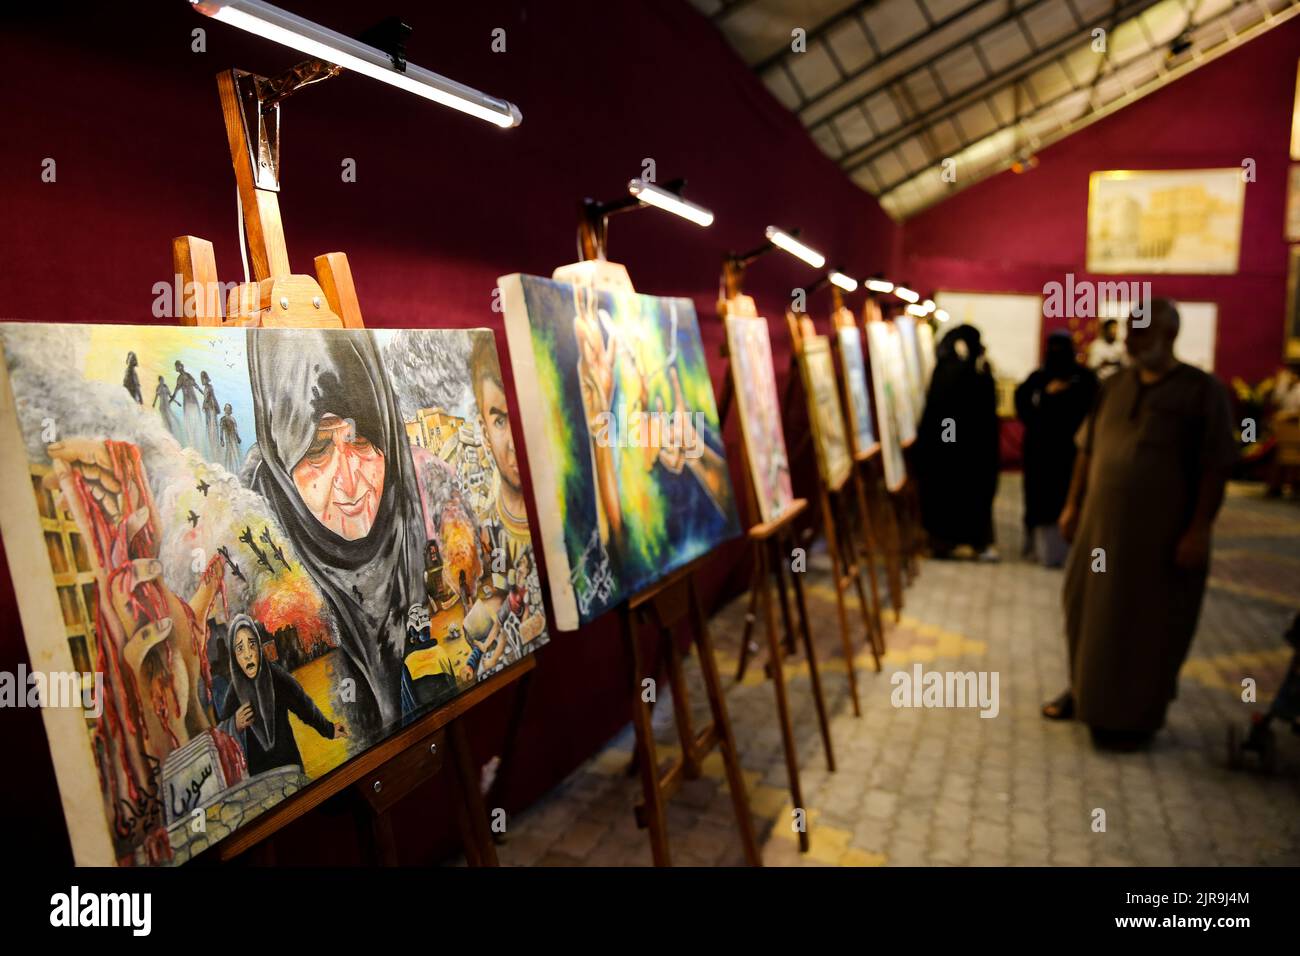 Idlib, Syria. 20th Aug, 2022. Idlib, Syria. 20 August 2022. An art exhibition is held in the opposition-controlled city of Idlib, in northern Syria. The art exhibition included paintings, calligraphy artworks, and mosaics, highlighting the suffering and hopes of Syrians amid the ongoing conflict. Part of the exhibition was dedicated to three-dimensional models of major historical sites of Syria, including the Aleppo Citadel, the Deir ez-Zor suspension bridge, and the Al-Omari Mosque in Daraa. The art exhibition was set up together with the first book fair organised in Idlib since being under Stock Photo